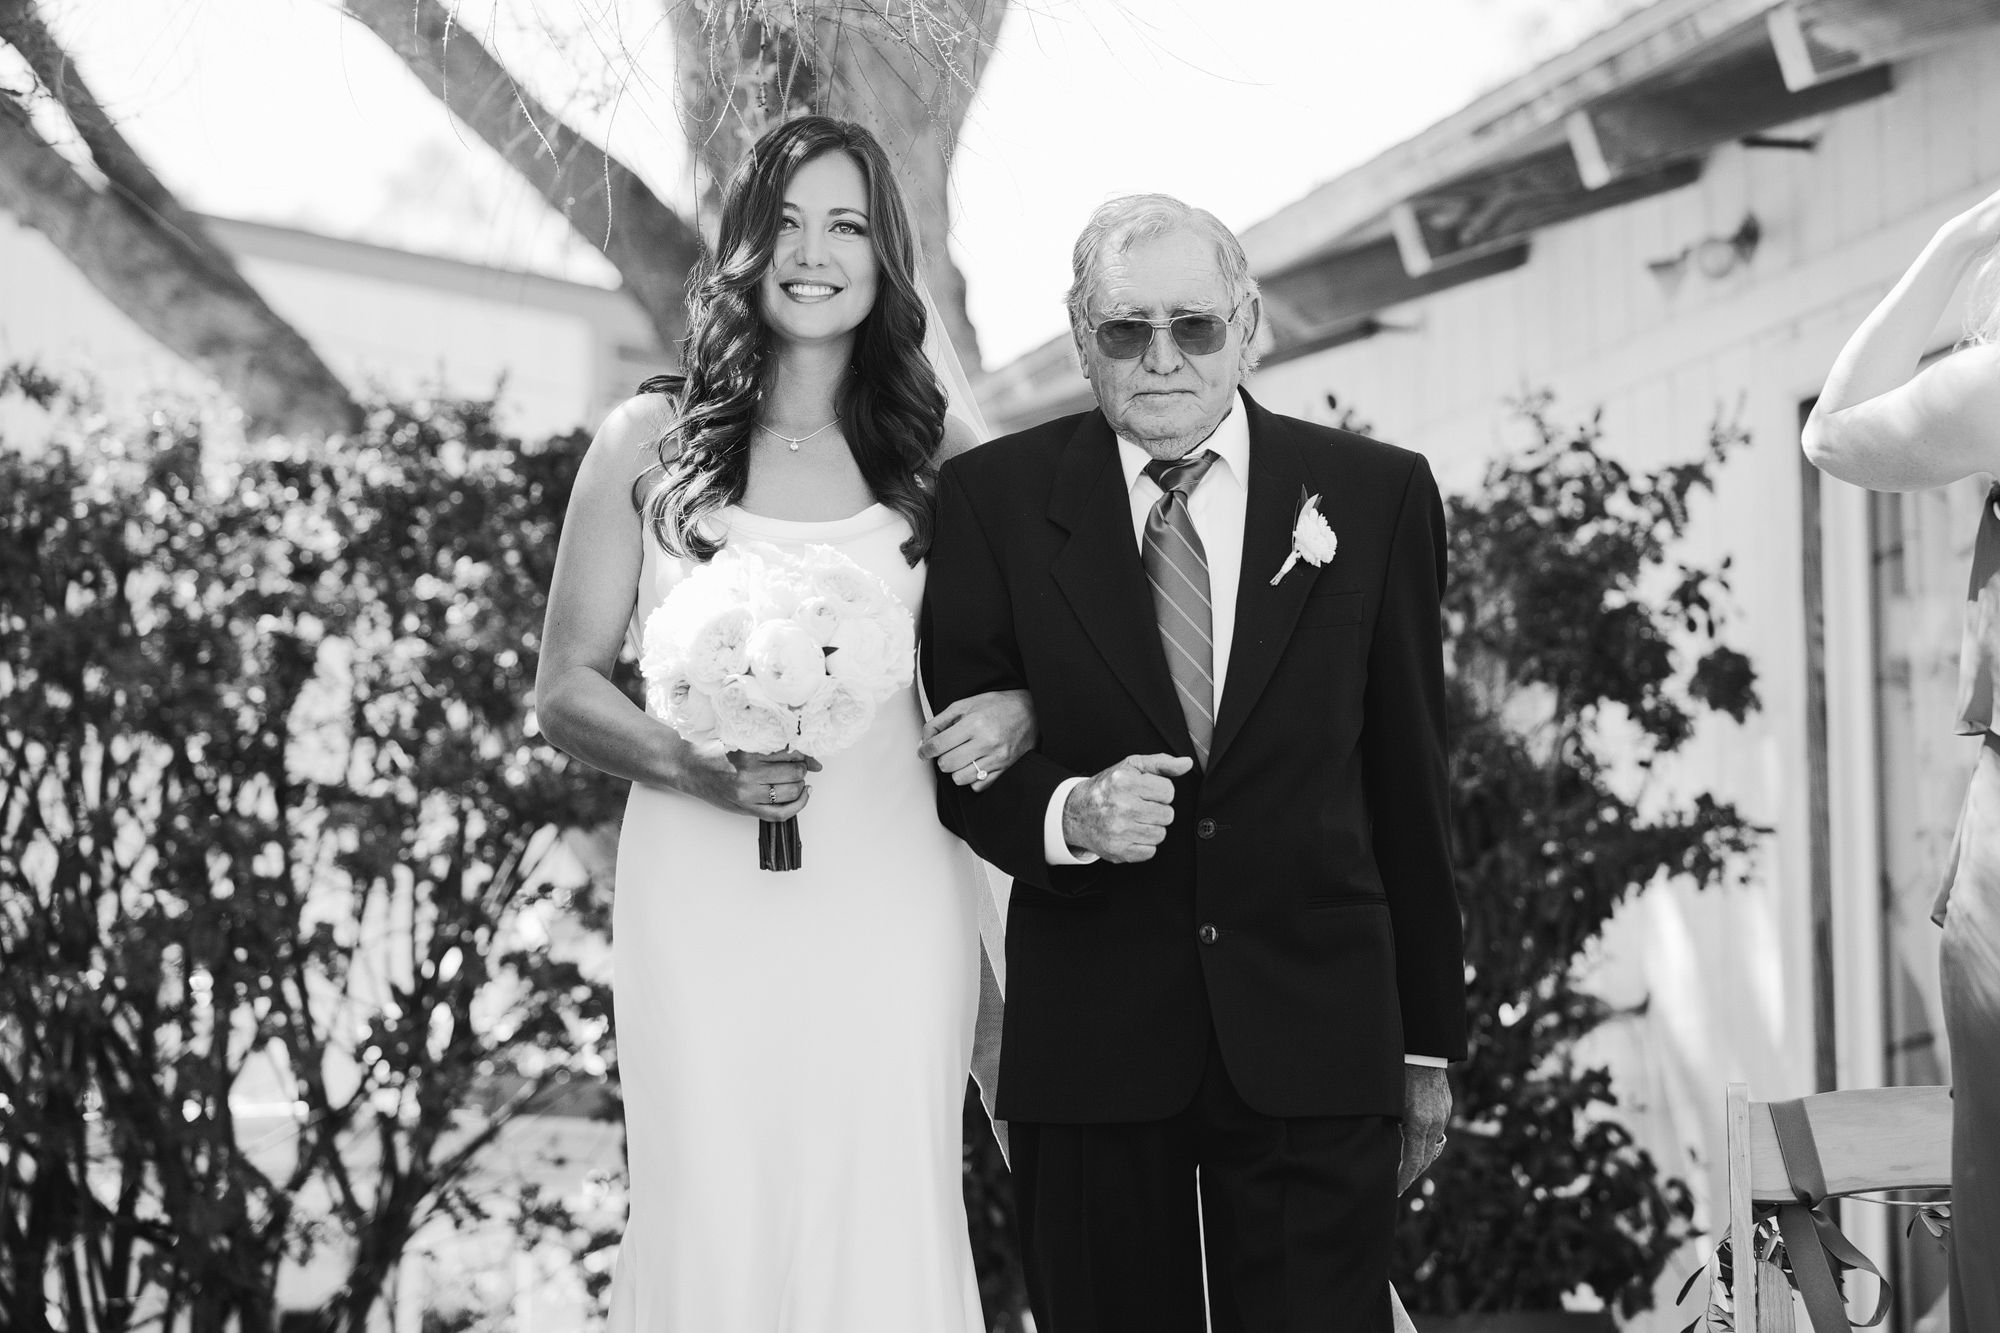 Jessica walked down the aisle with her dad. 